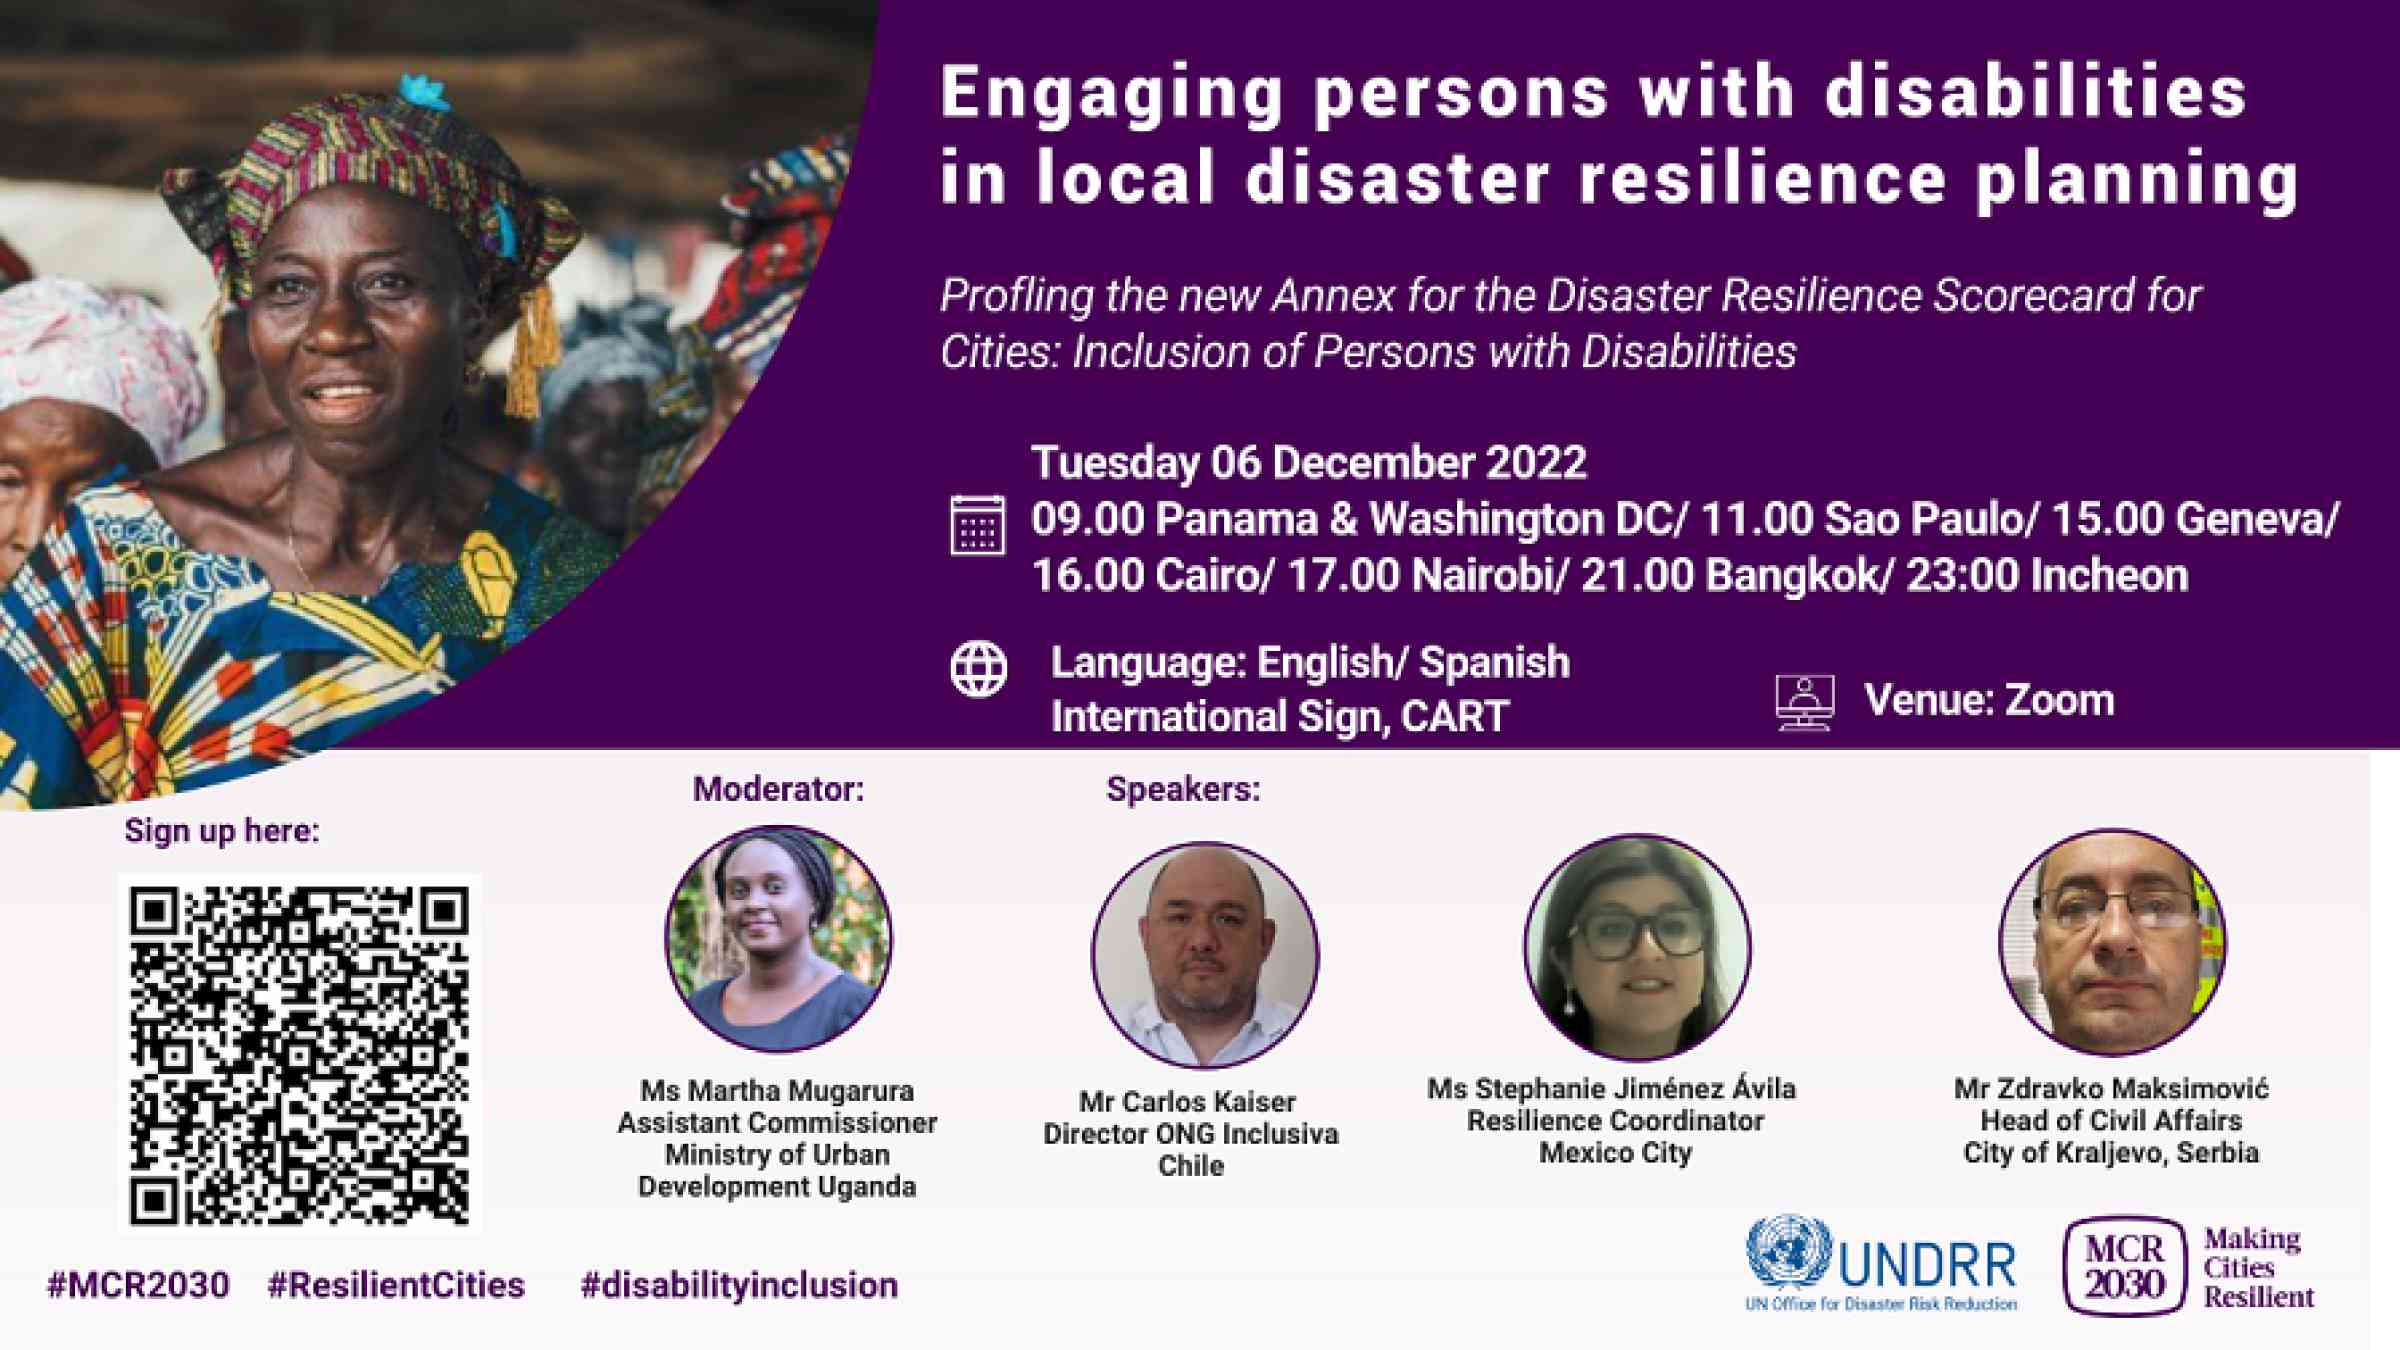 Engaging persons with disabilities on local disaster resilience planning